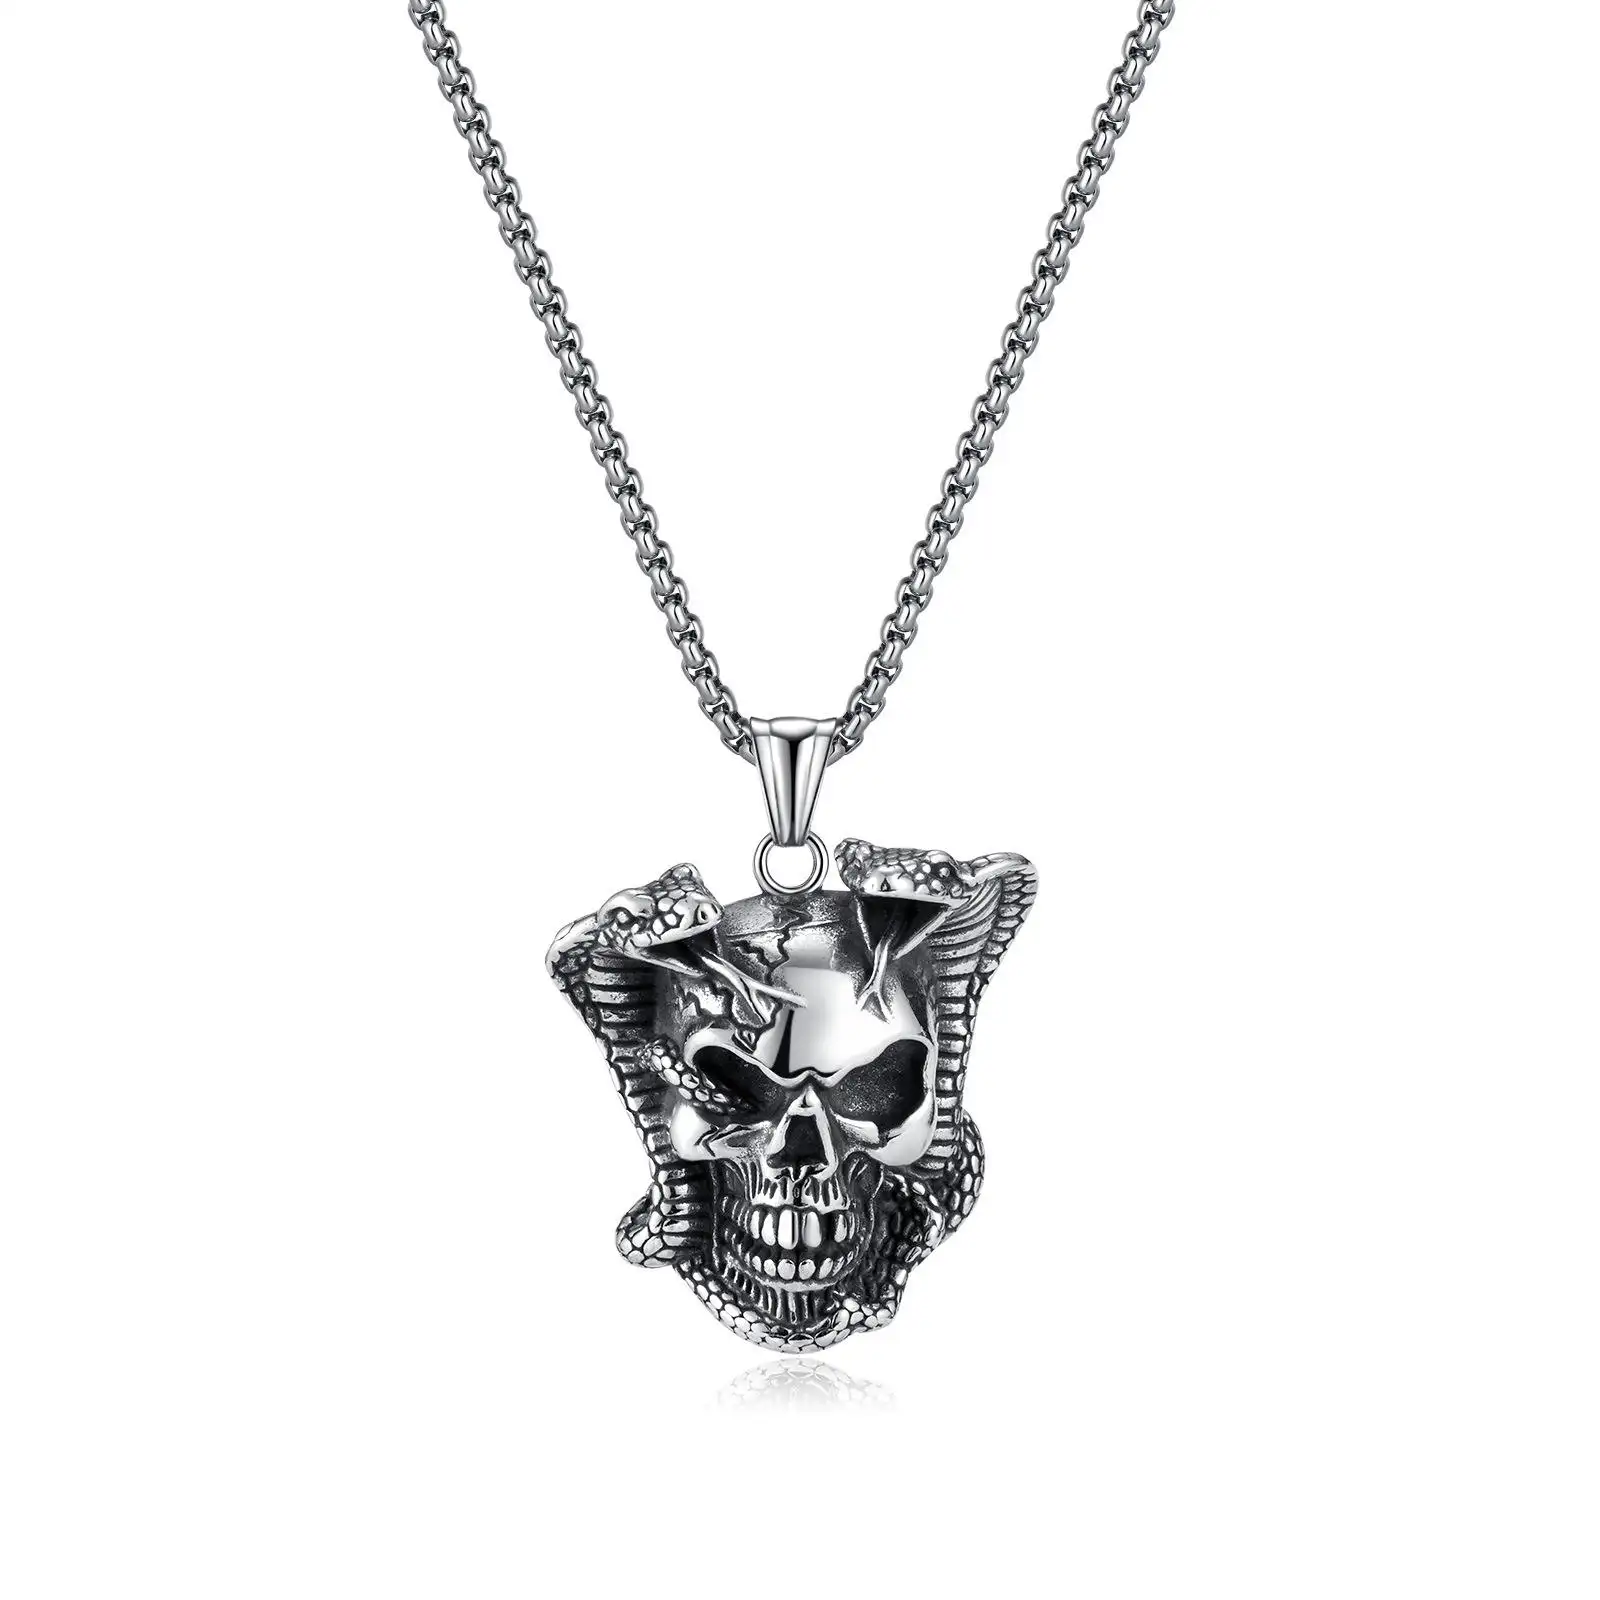 Hip Hop Jewelry Stainless Steel Cobra Snake Pendant Gothic Skull Pendant Necklace